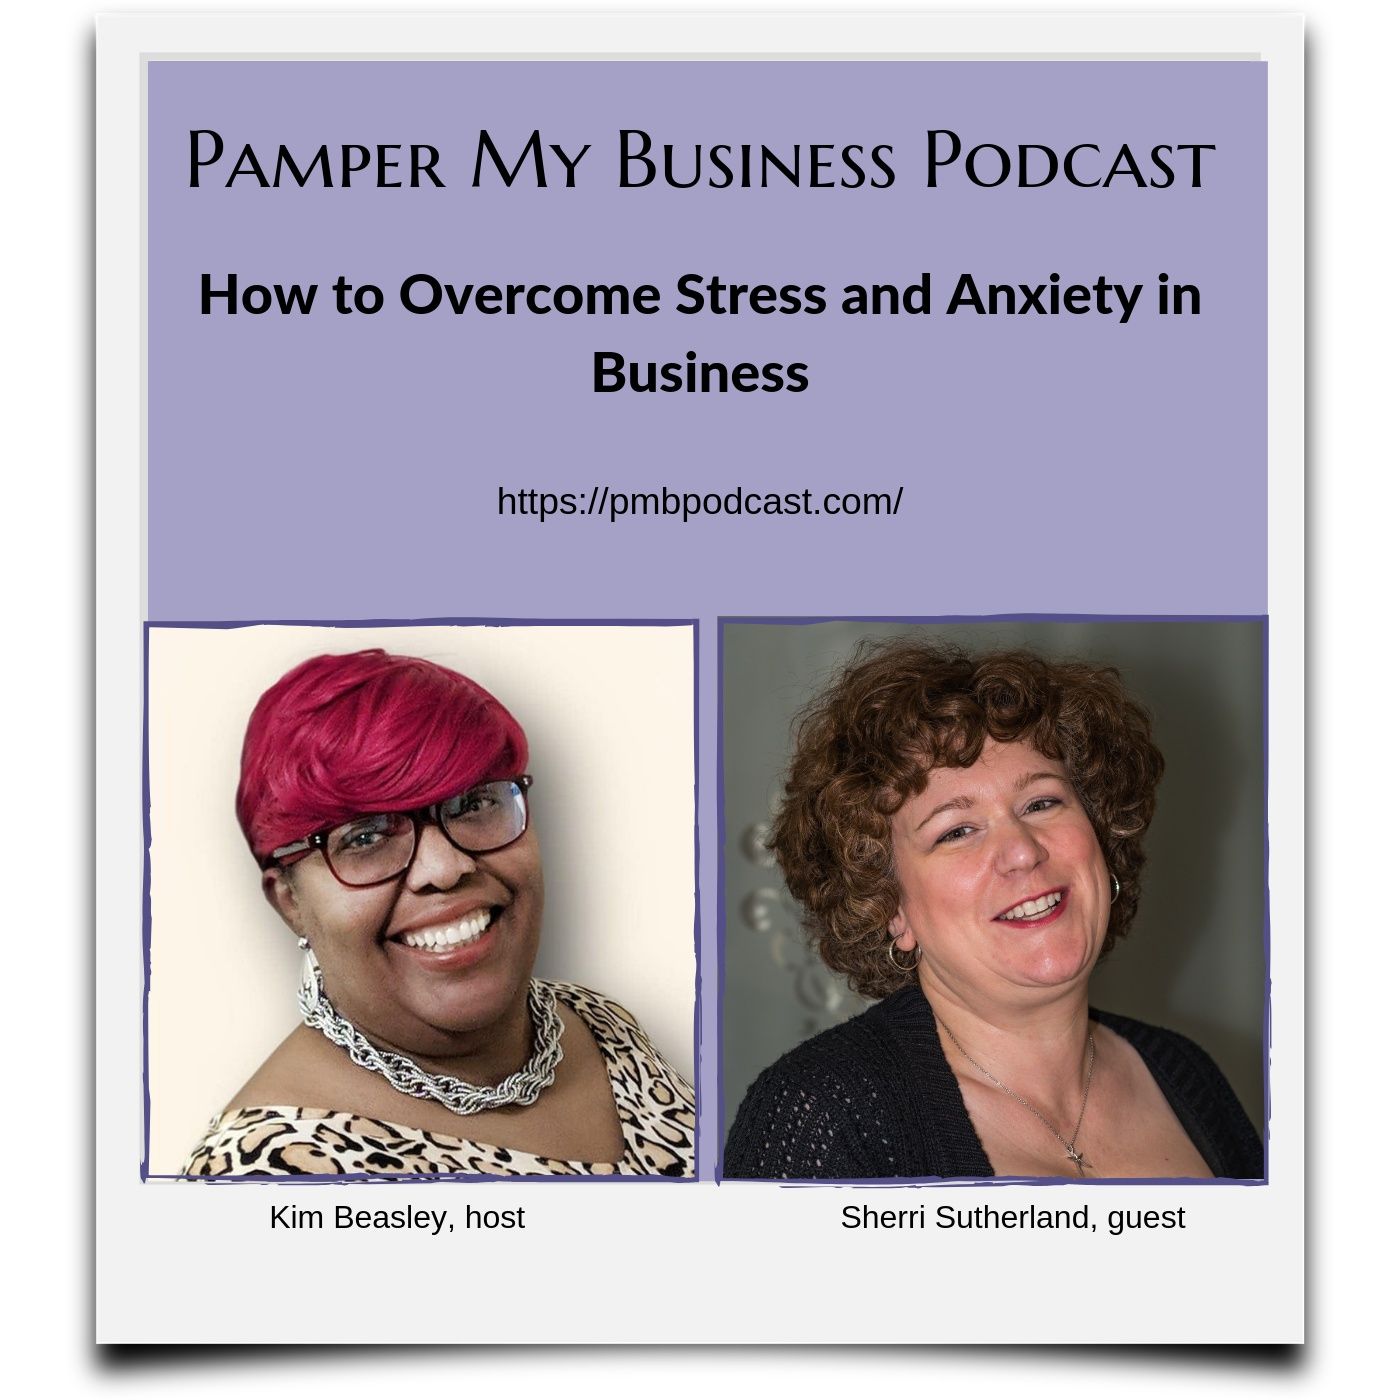 How to Overcome Stress and Anxiety in Business